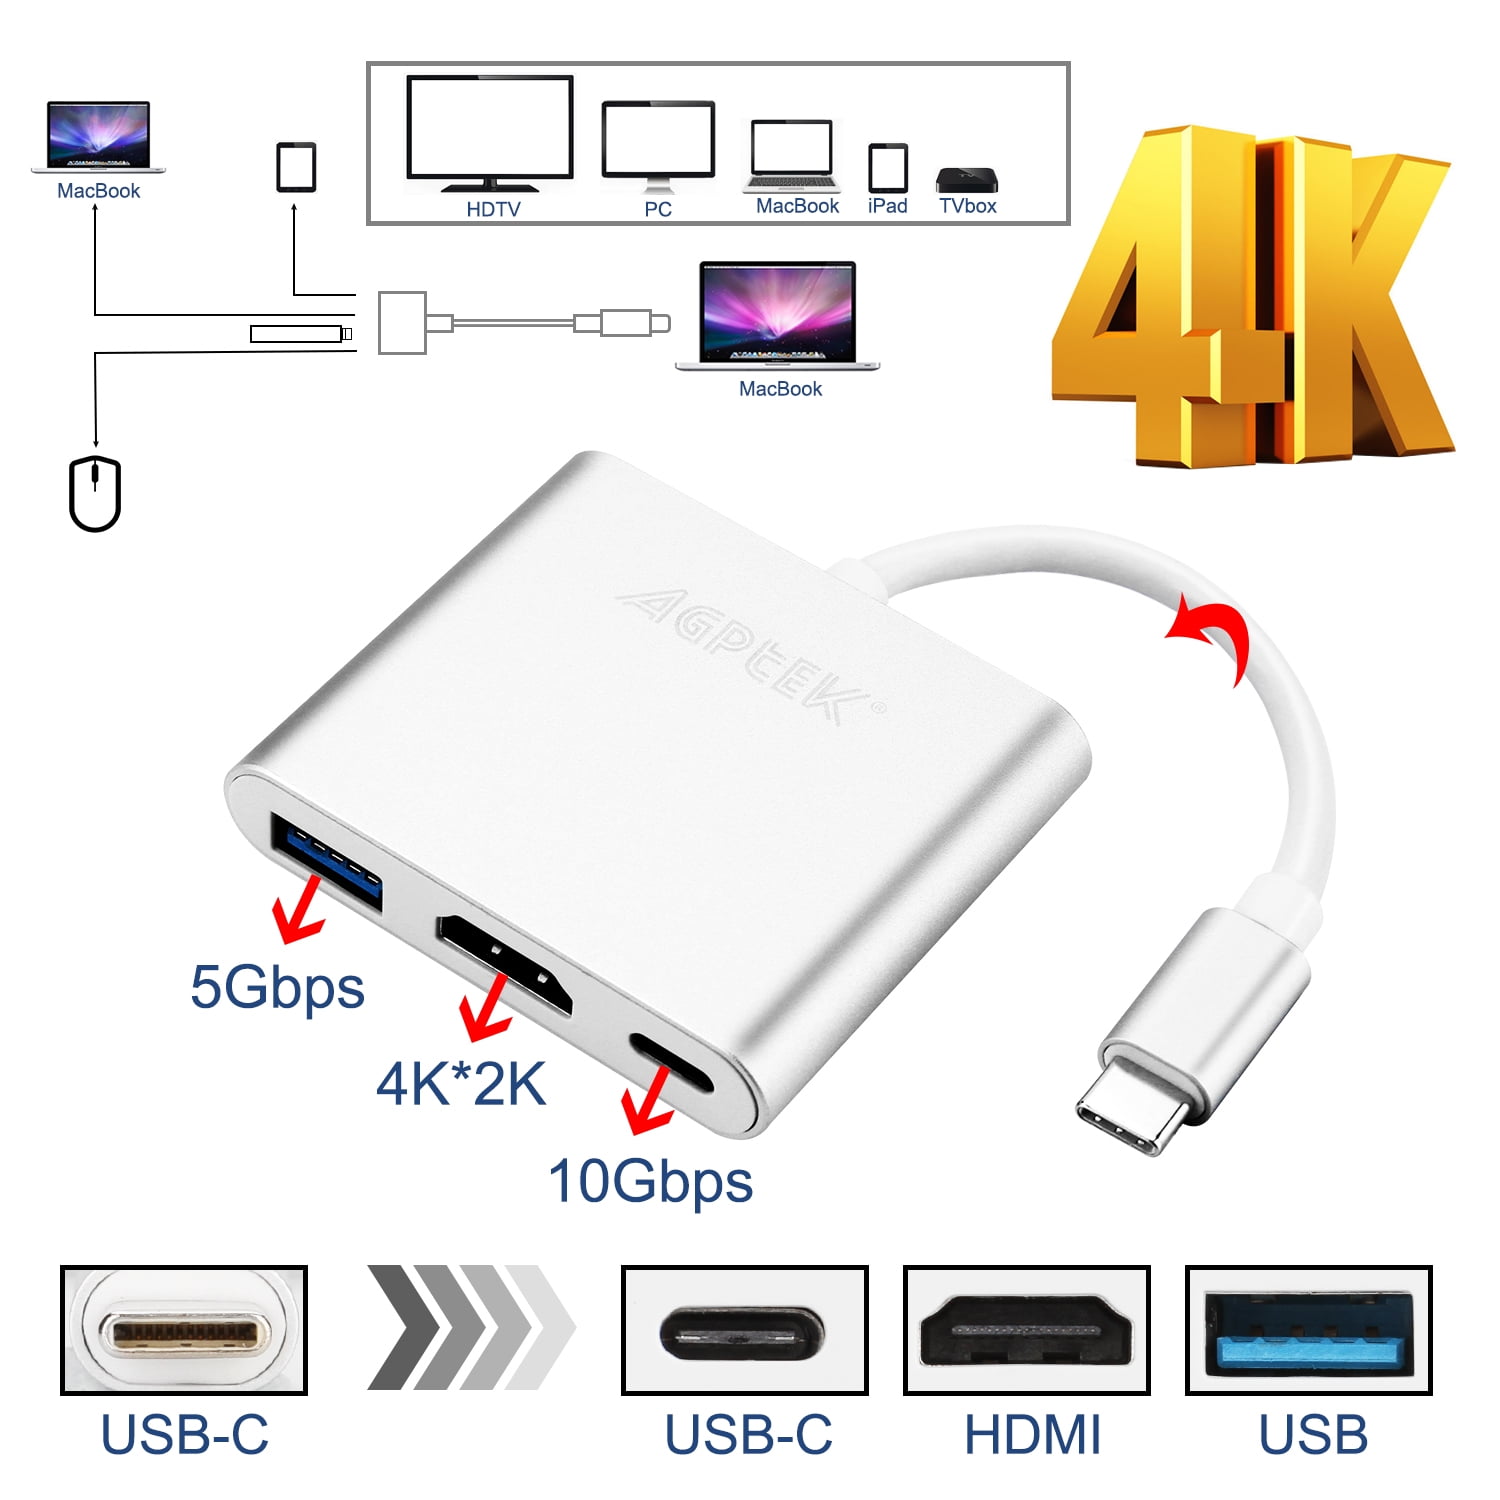 USB 3.1 Type C USB-C to VGA Female Cable Adapter Hub for 12" Macbook Google Hot